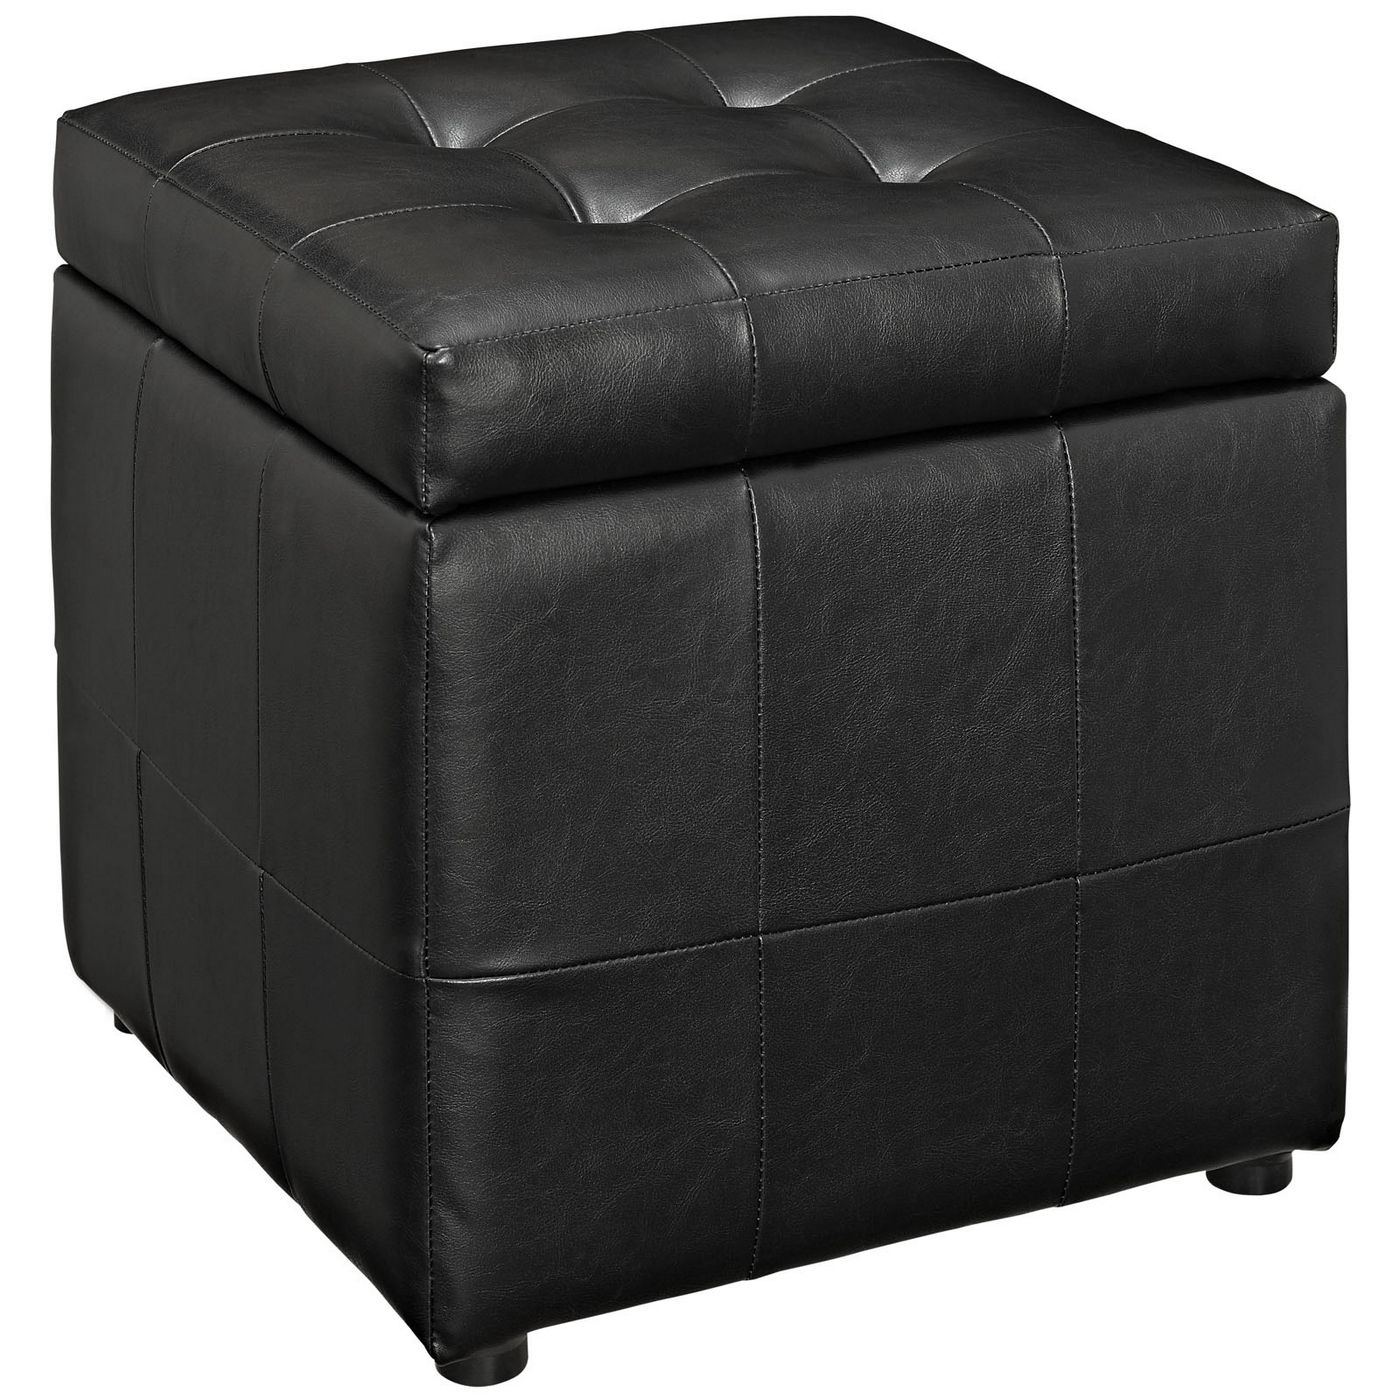 Volt Contemporary Upholstered Button Tufted Storage Ottoman, Black Regarding Black And Natural Cotton Pouf Ottomans (View 11 of 20)